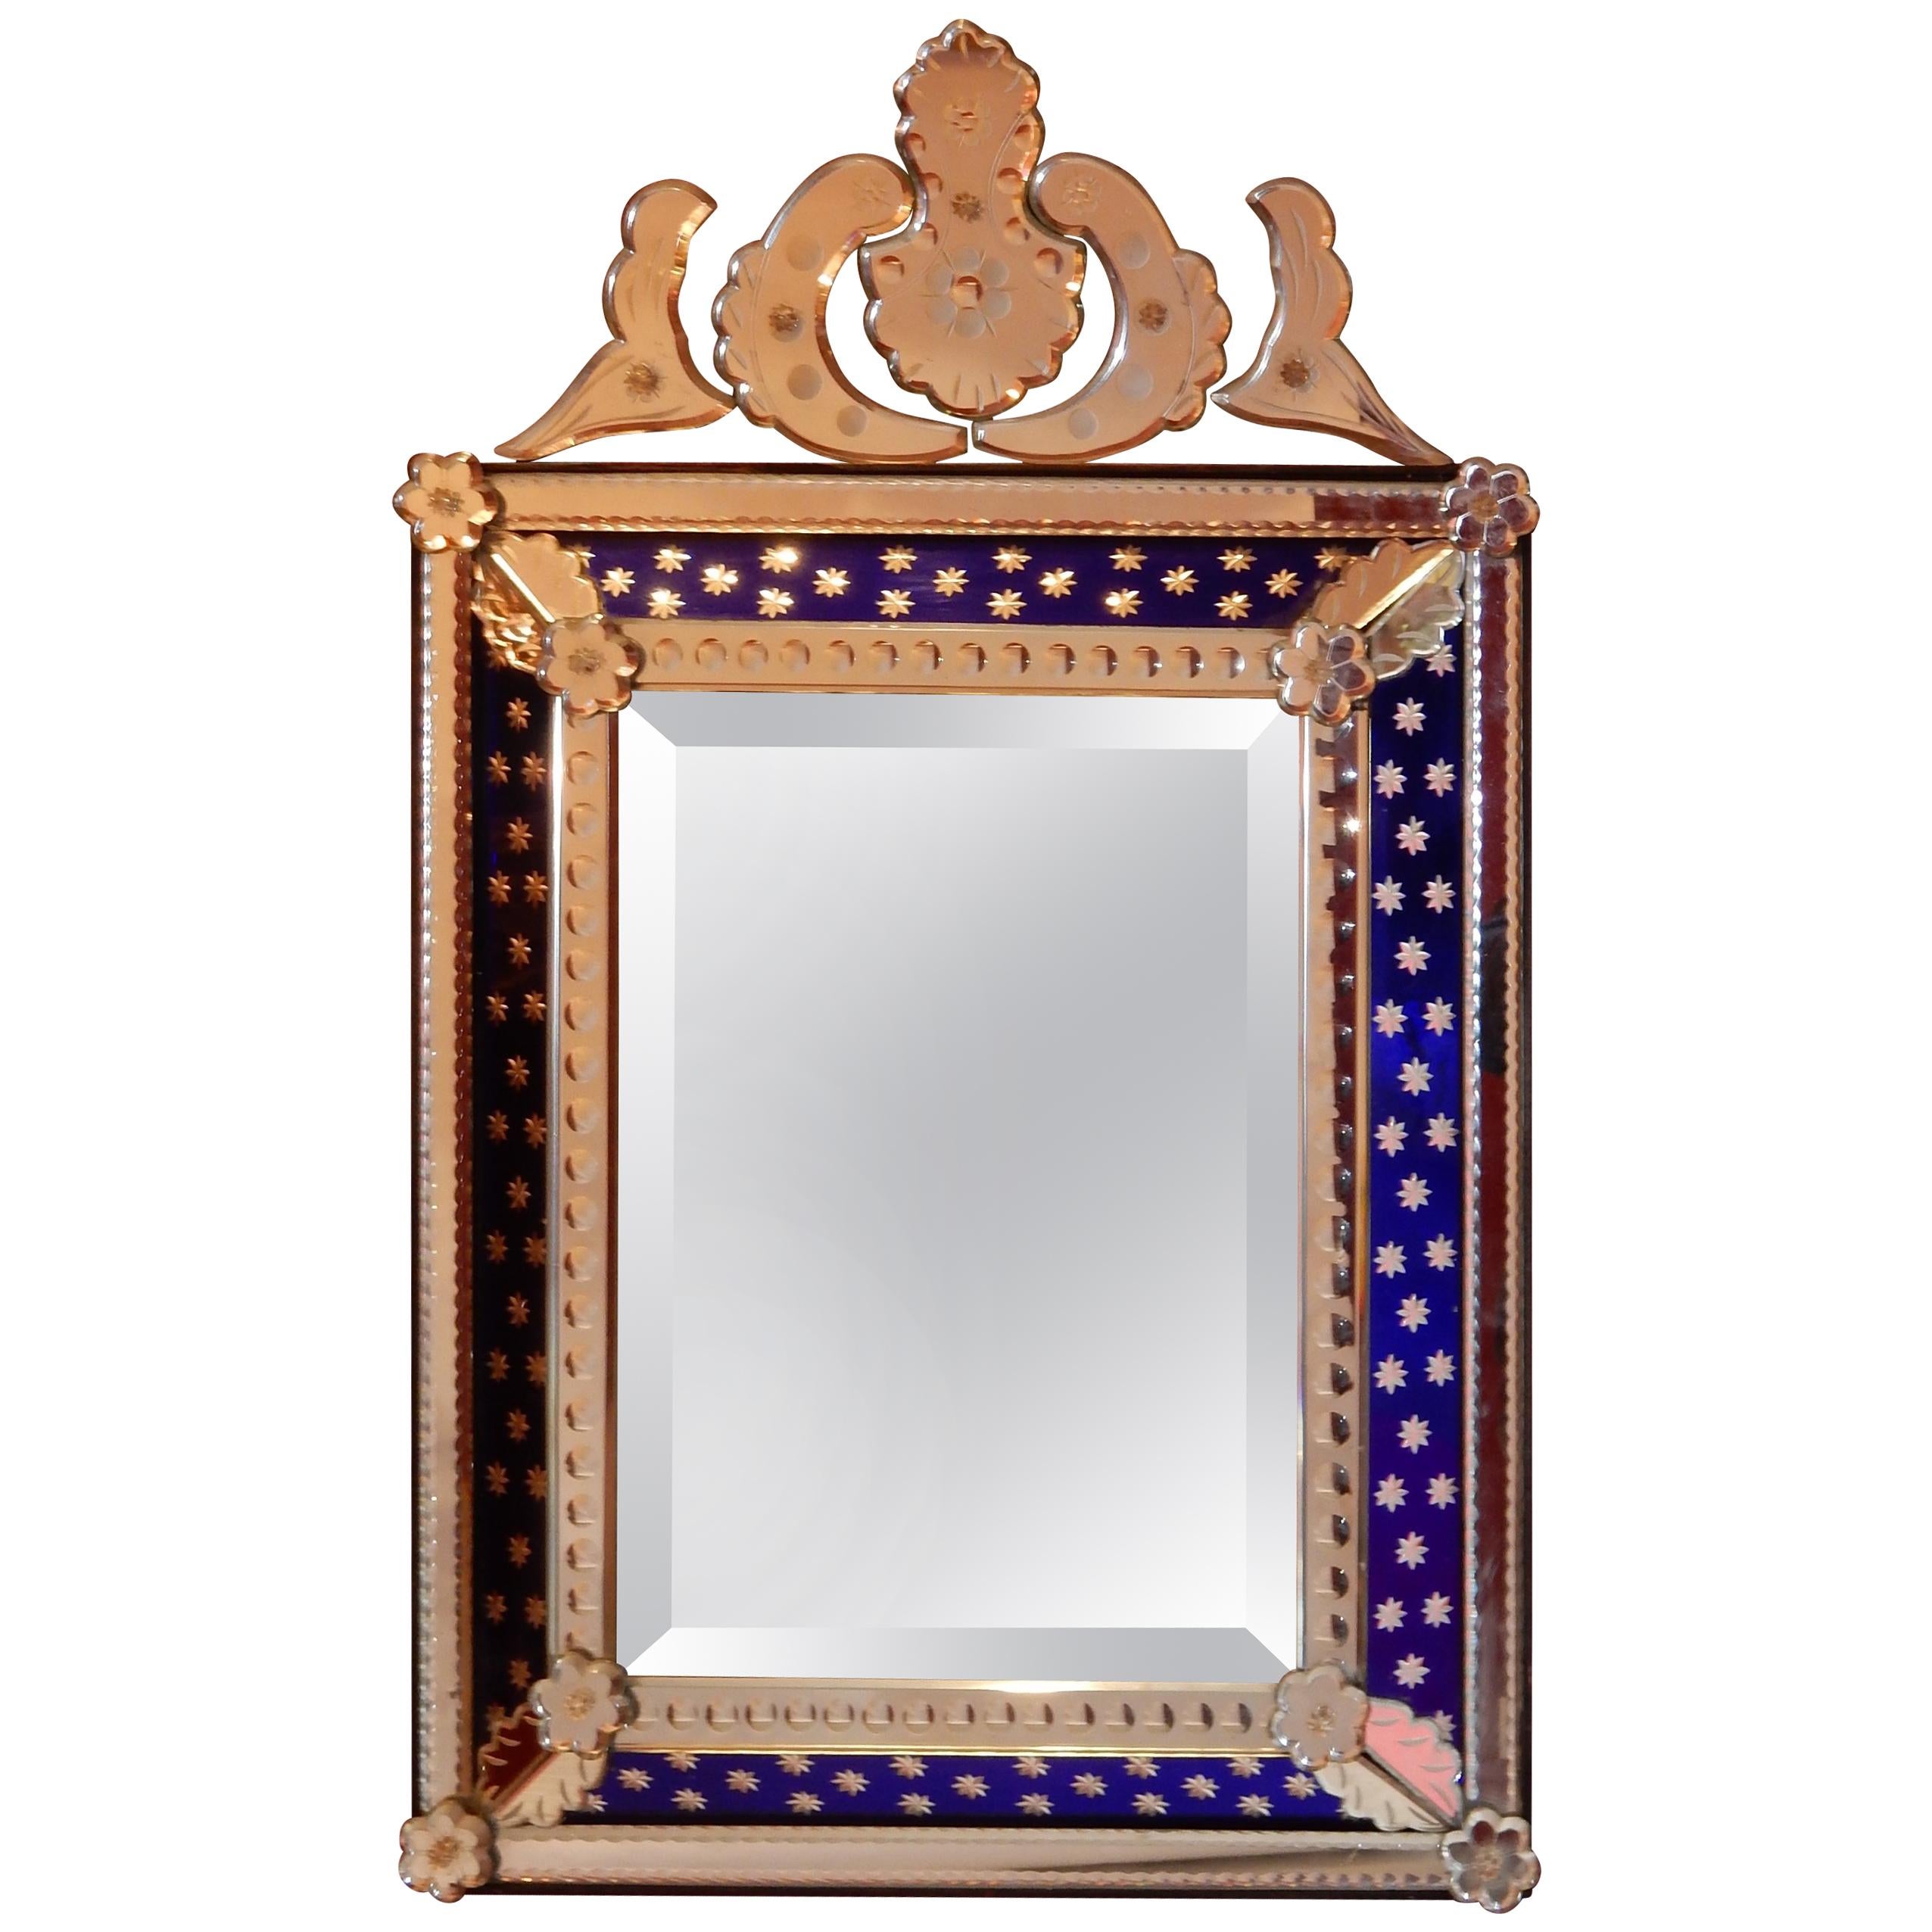 1940-1950 Venetian Mirror N3 with Pediment, Blue Glass Adorned with Stars